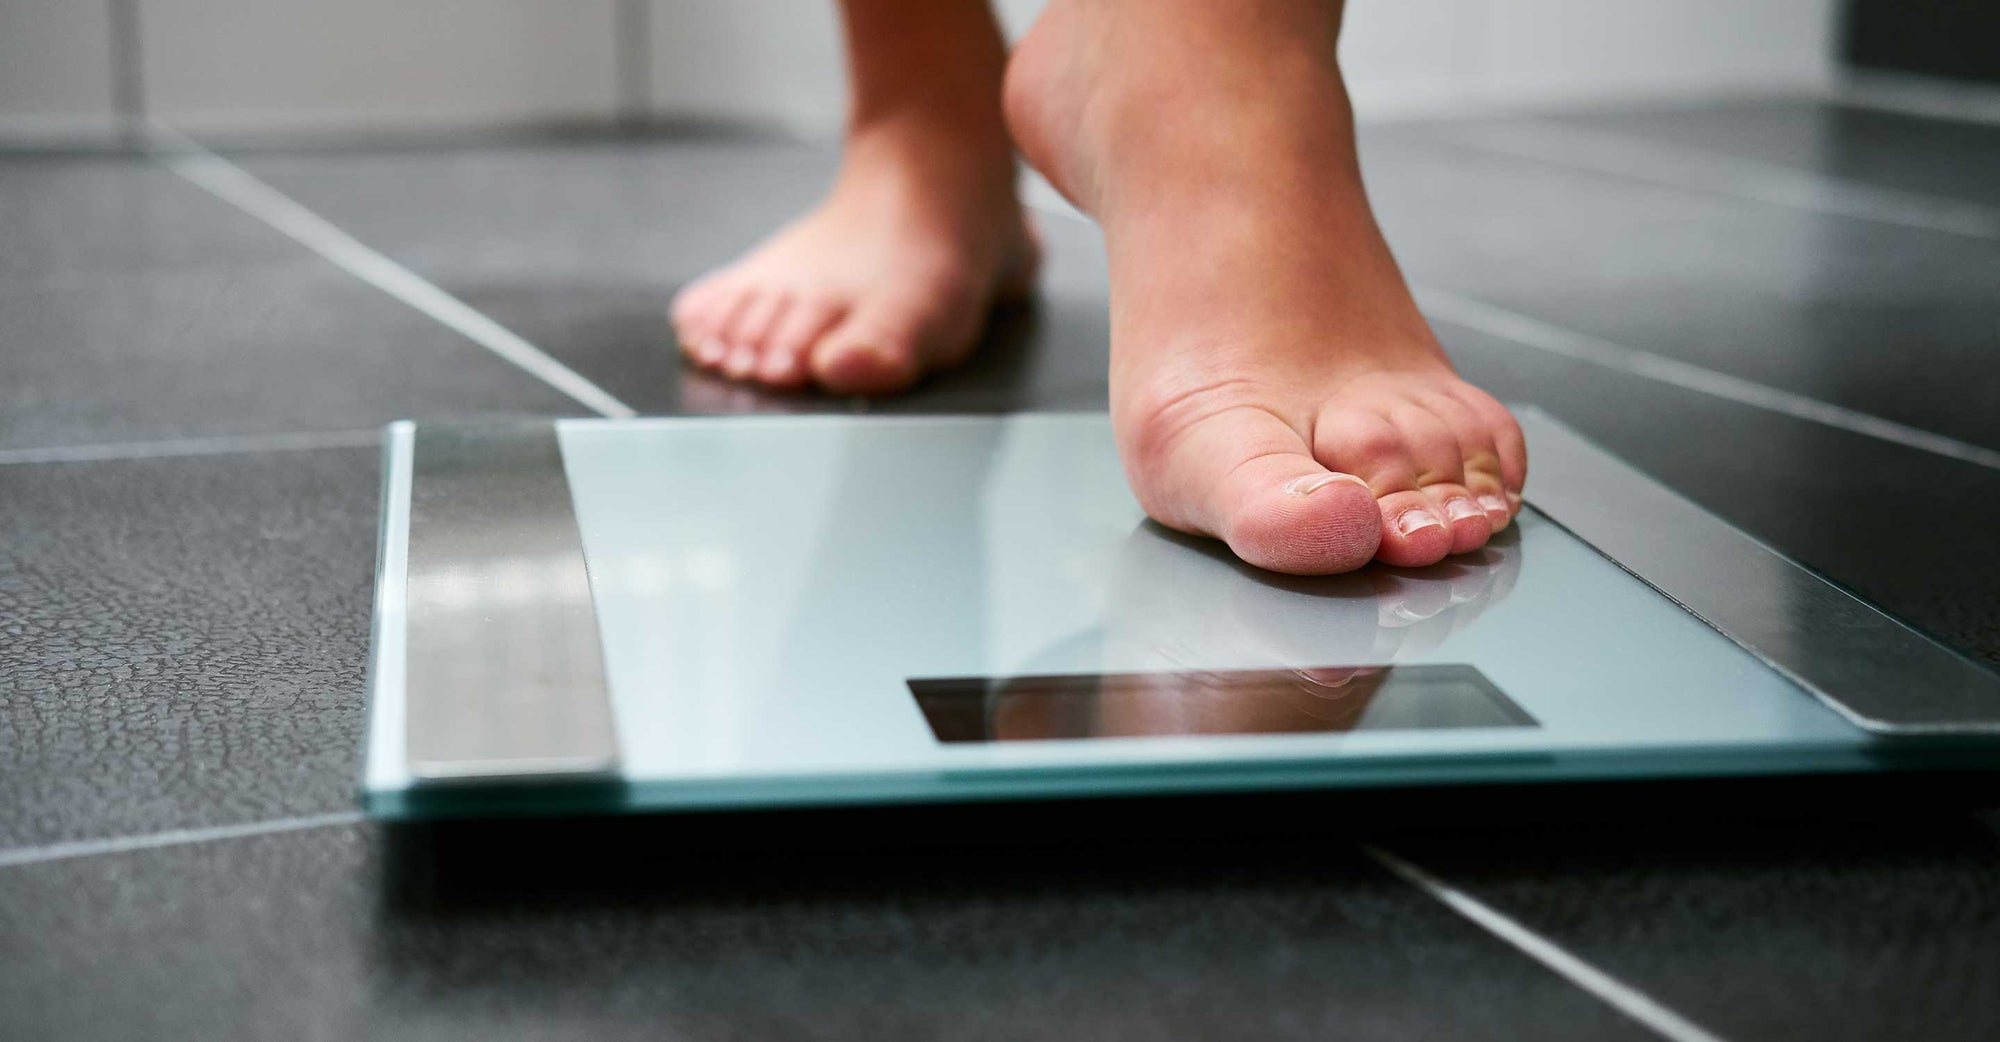 A person stepping on the scale